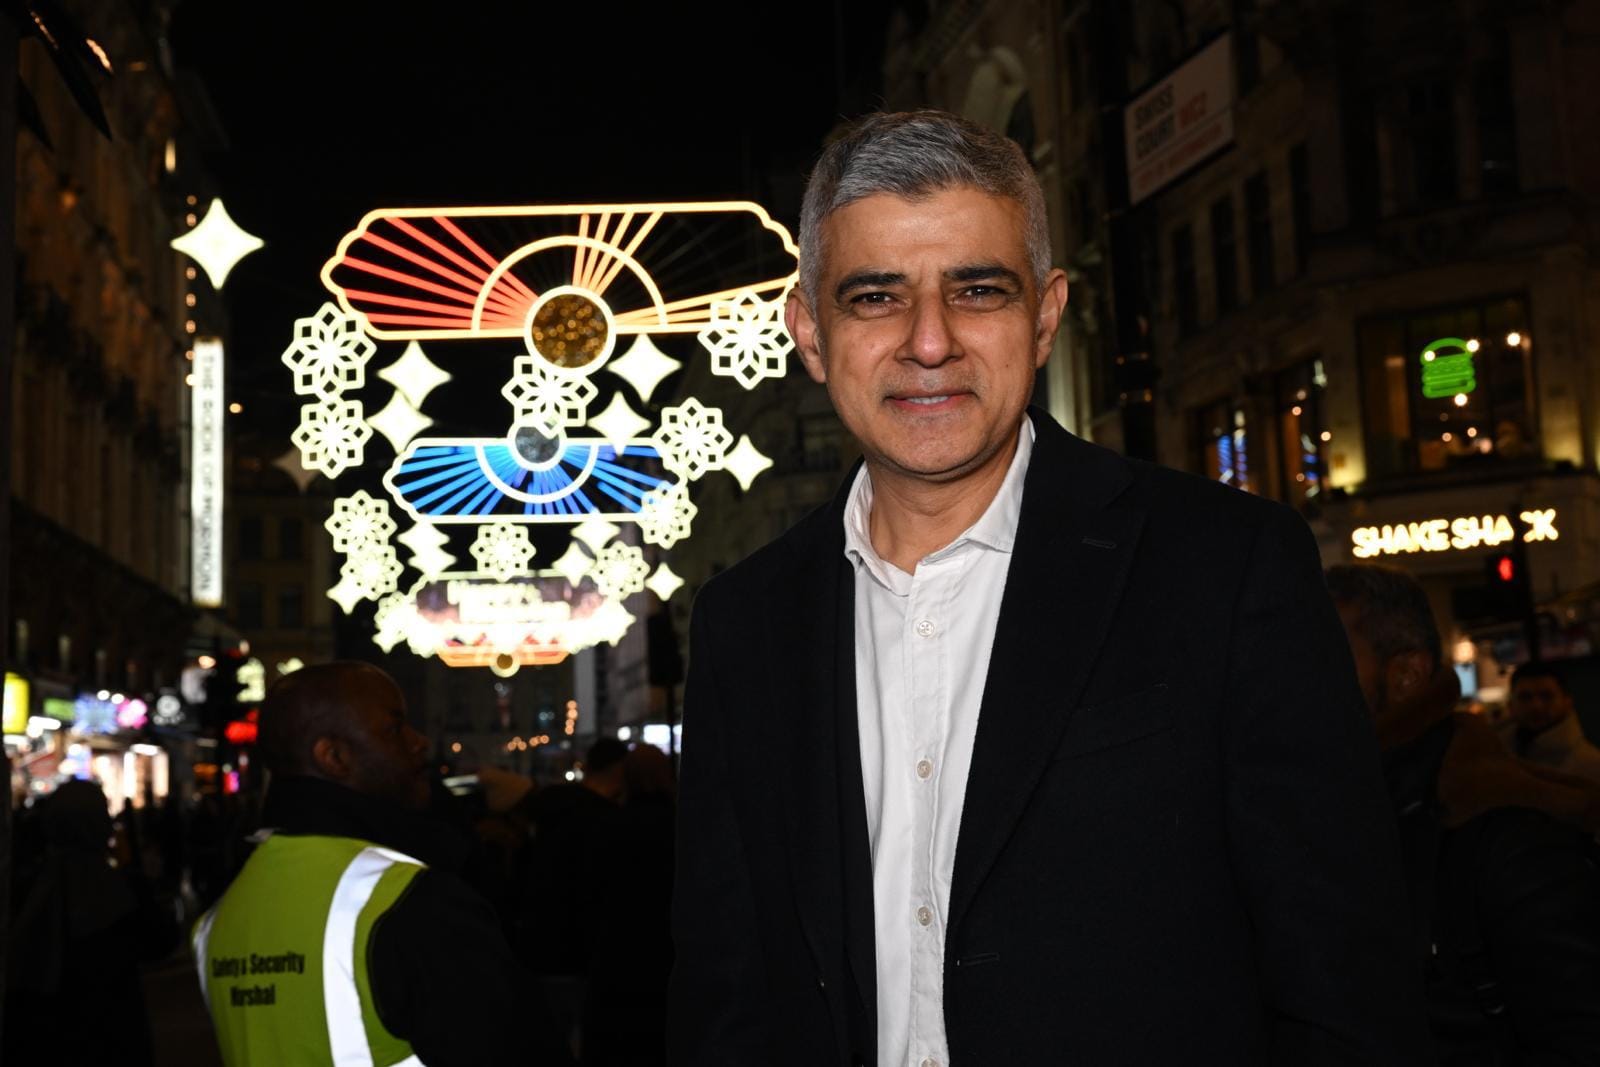 Labour’s Sadiq Khan first to become London mayor third term in a row